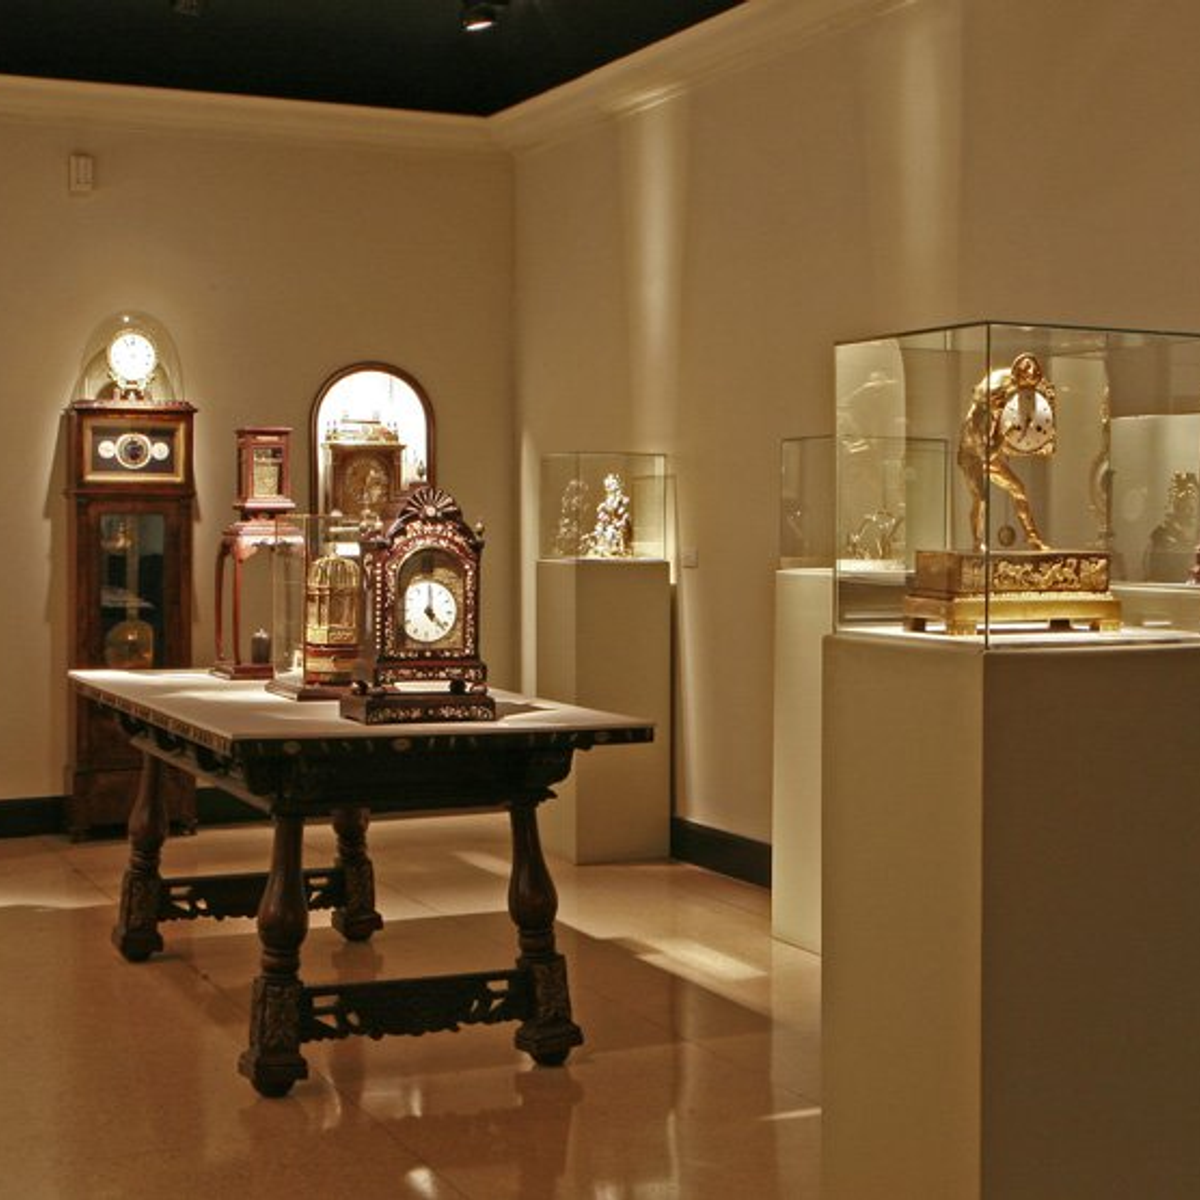 The grassy clock and watch museum